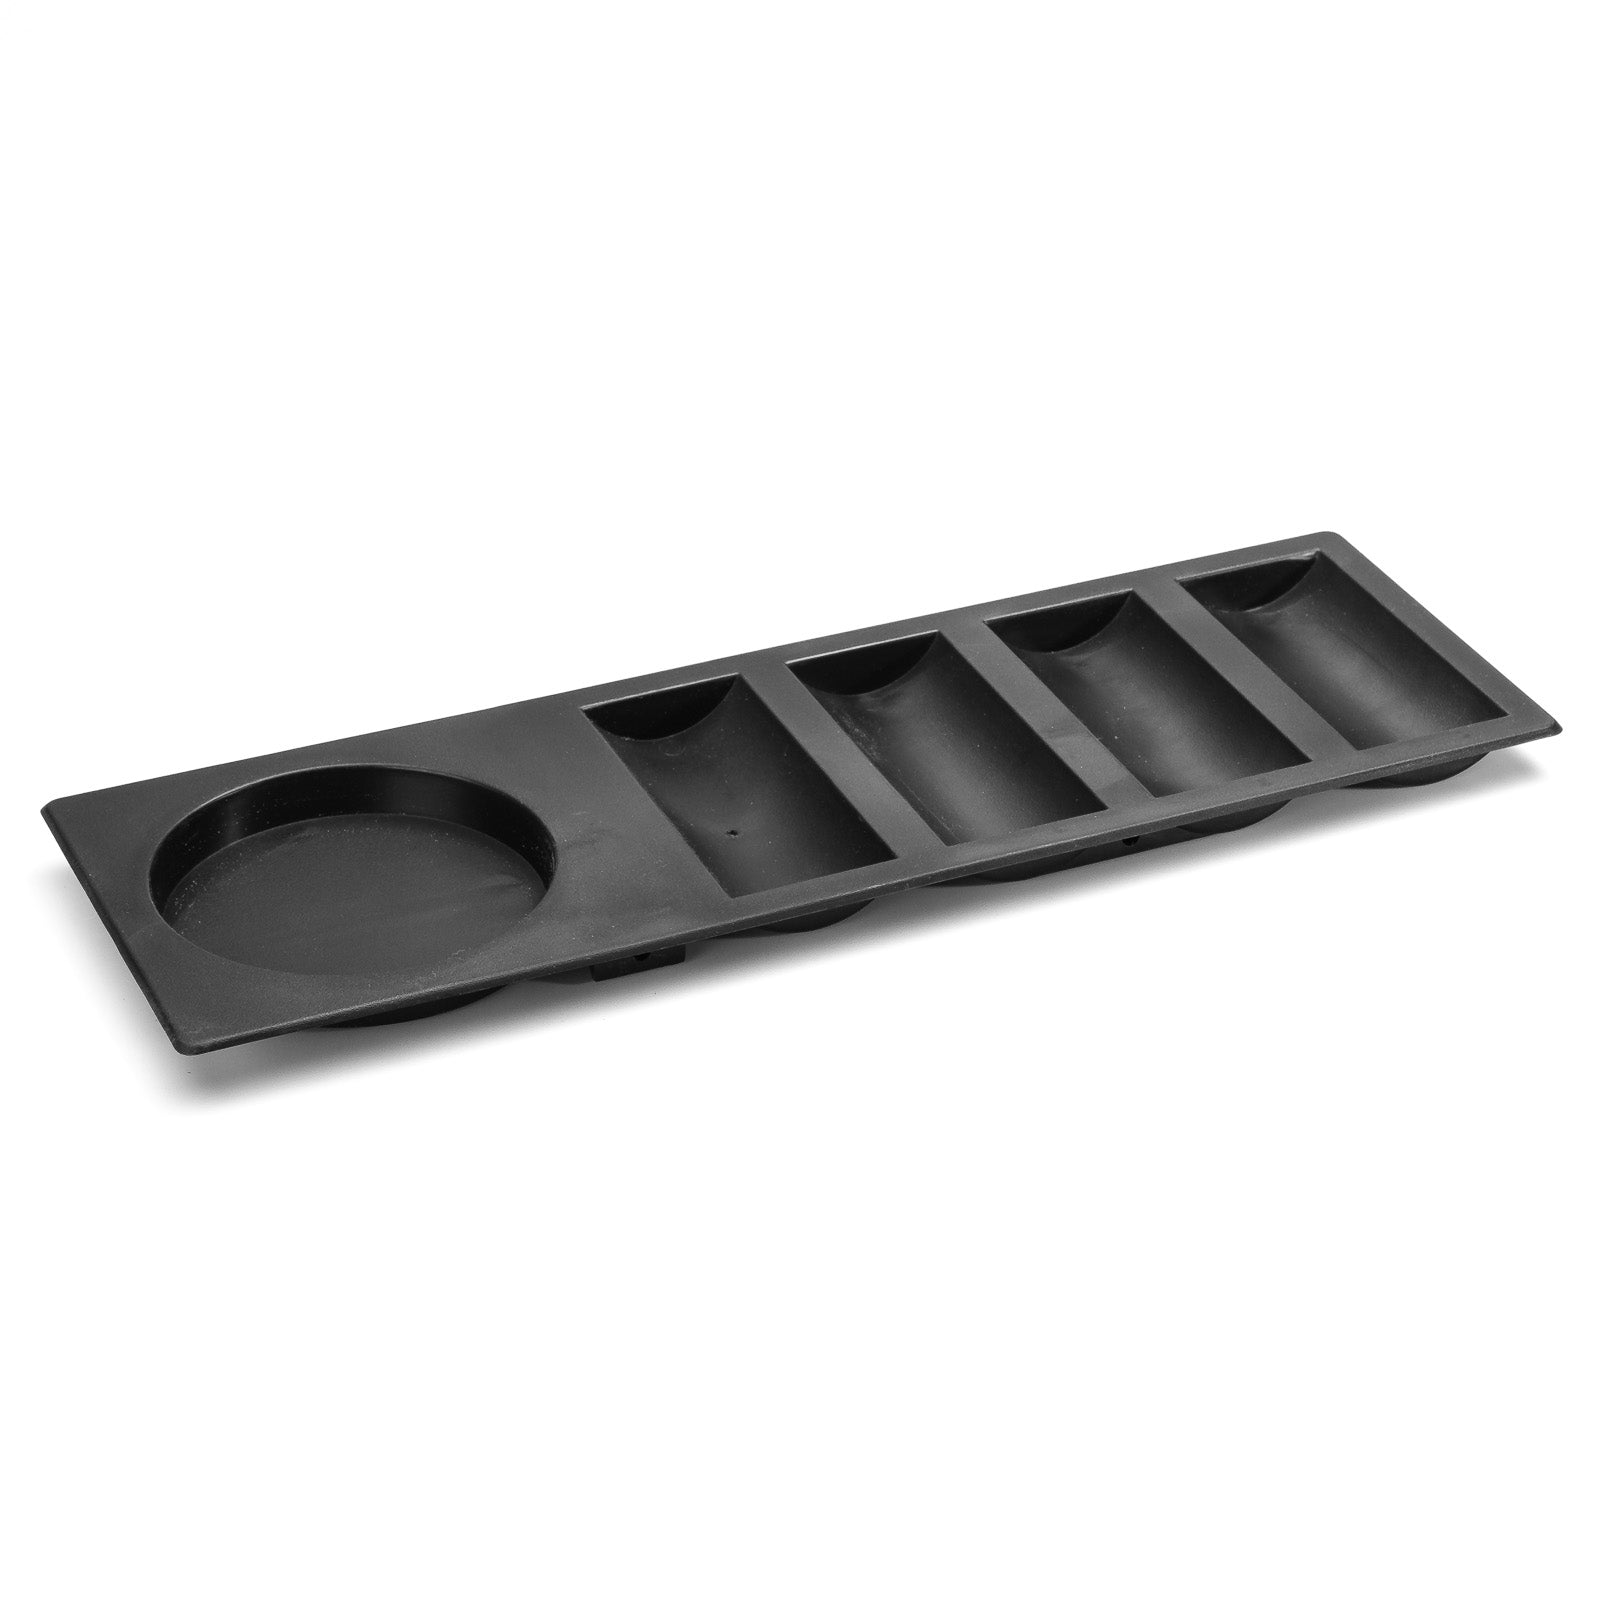 Black Straight Insert Poker Chip Tray with Cup Holder (4 Row / 100 chip)